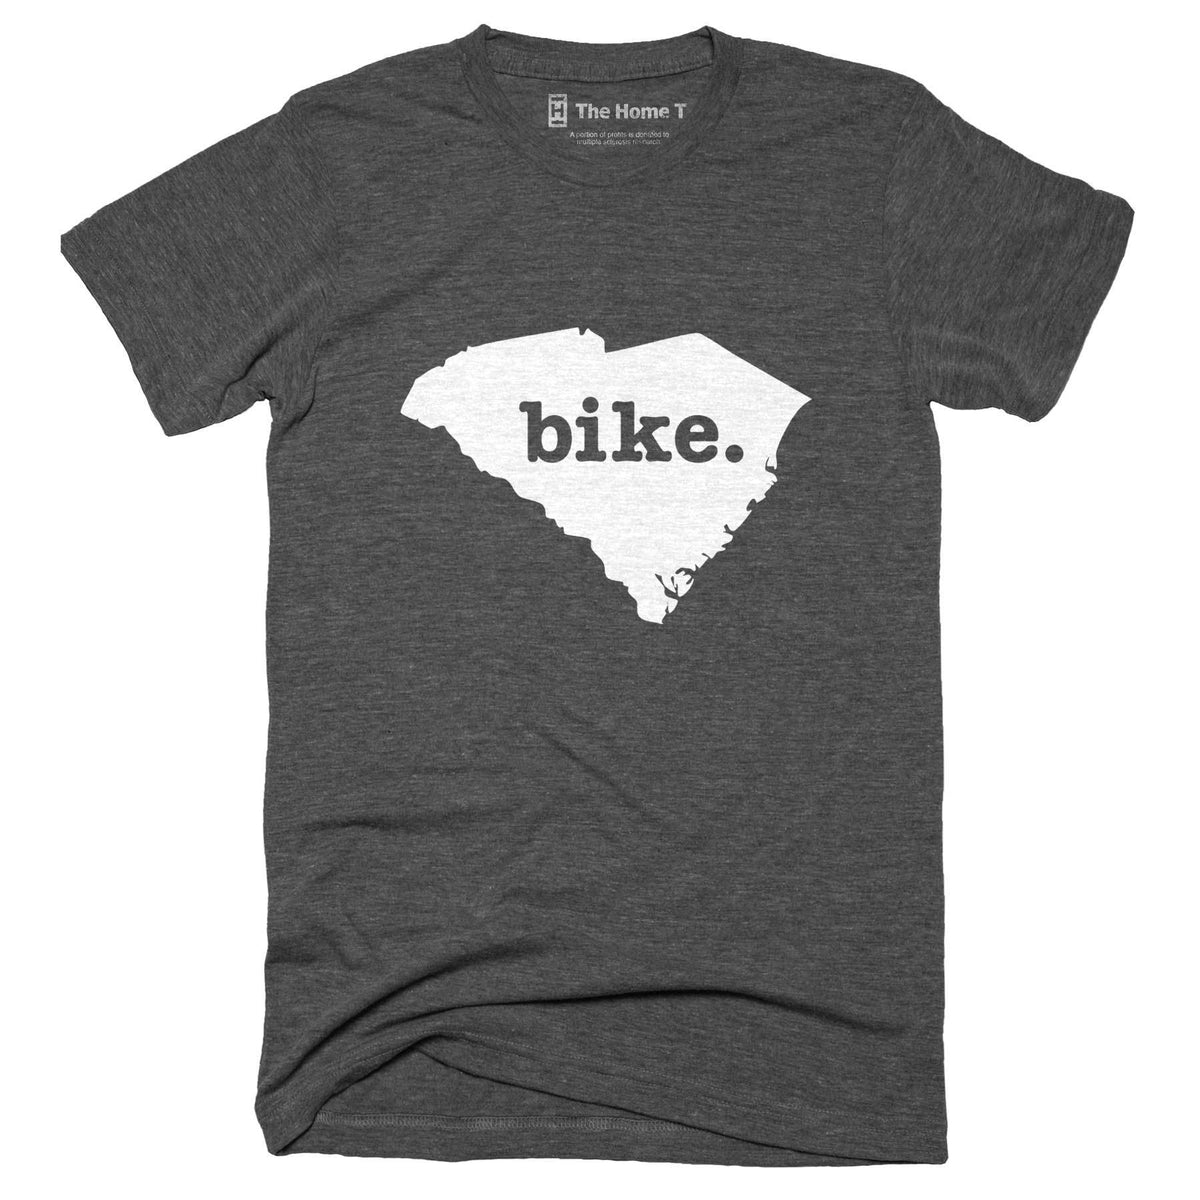 South Carolina Bike Home T-Shirt Outdoor Collection The Home T XS Grey